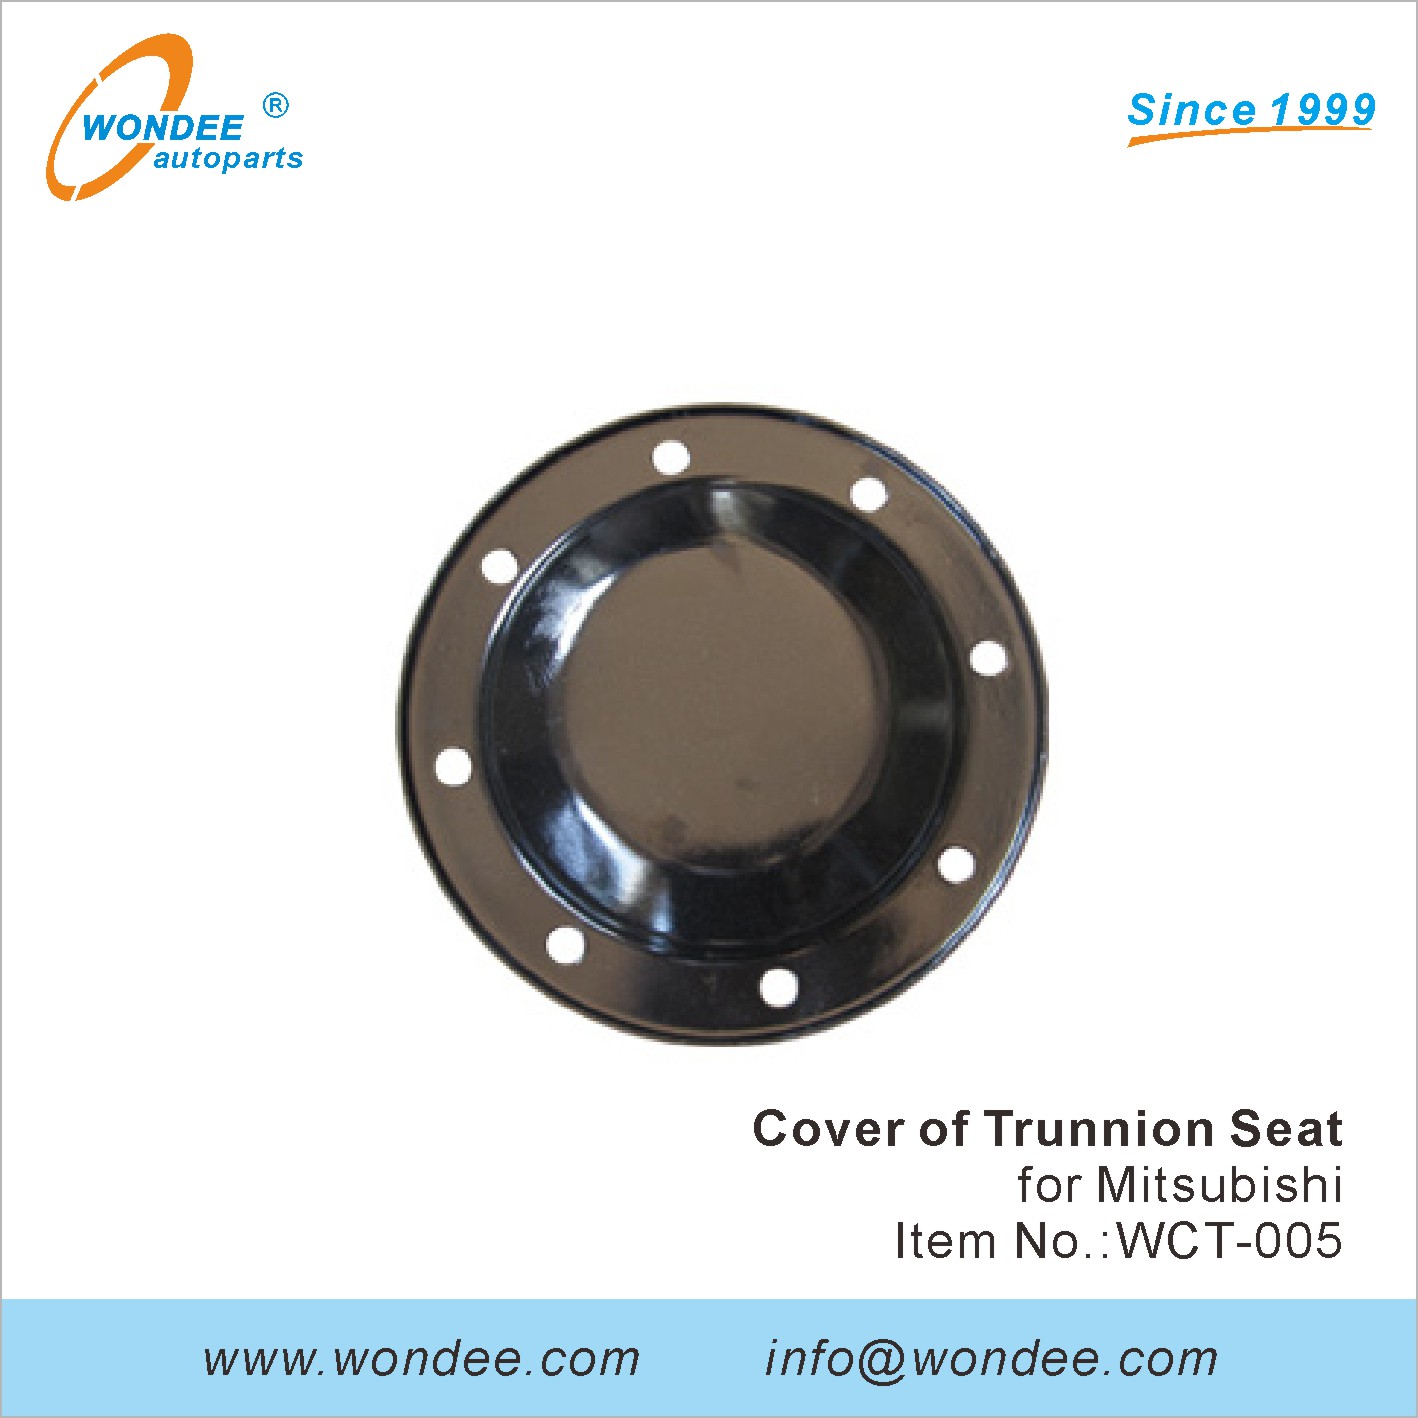 WONDEE cover of trunnion seat (5)